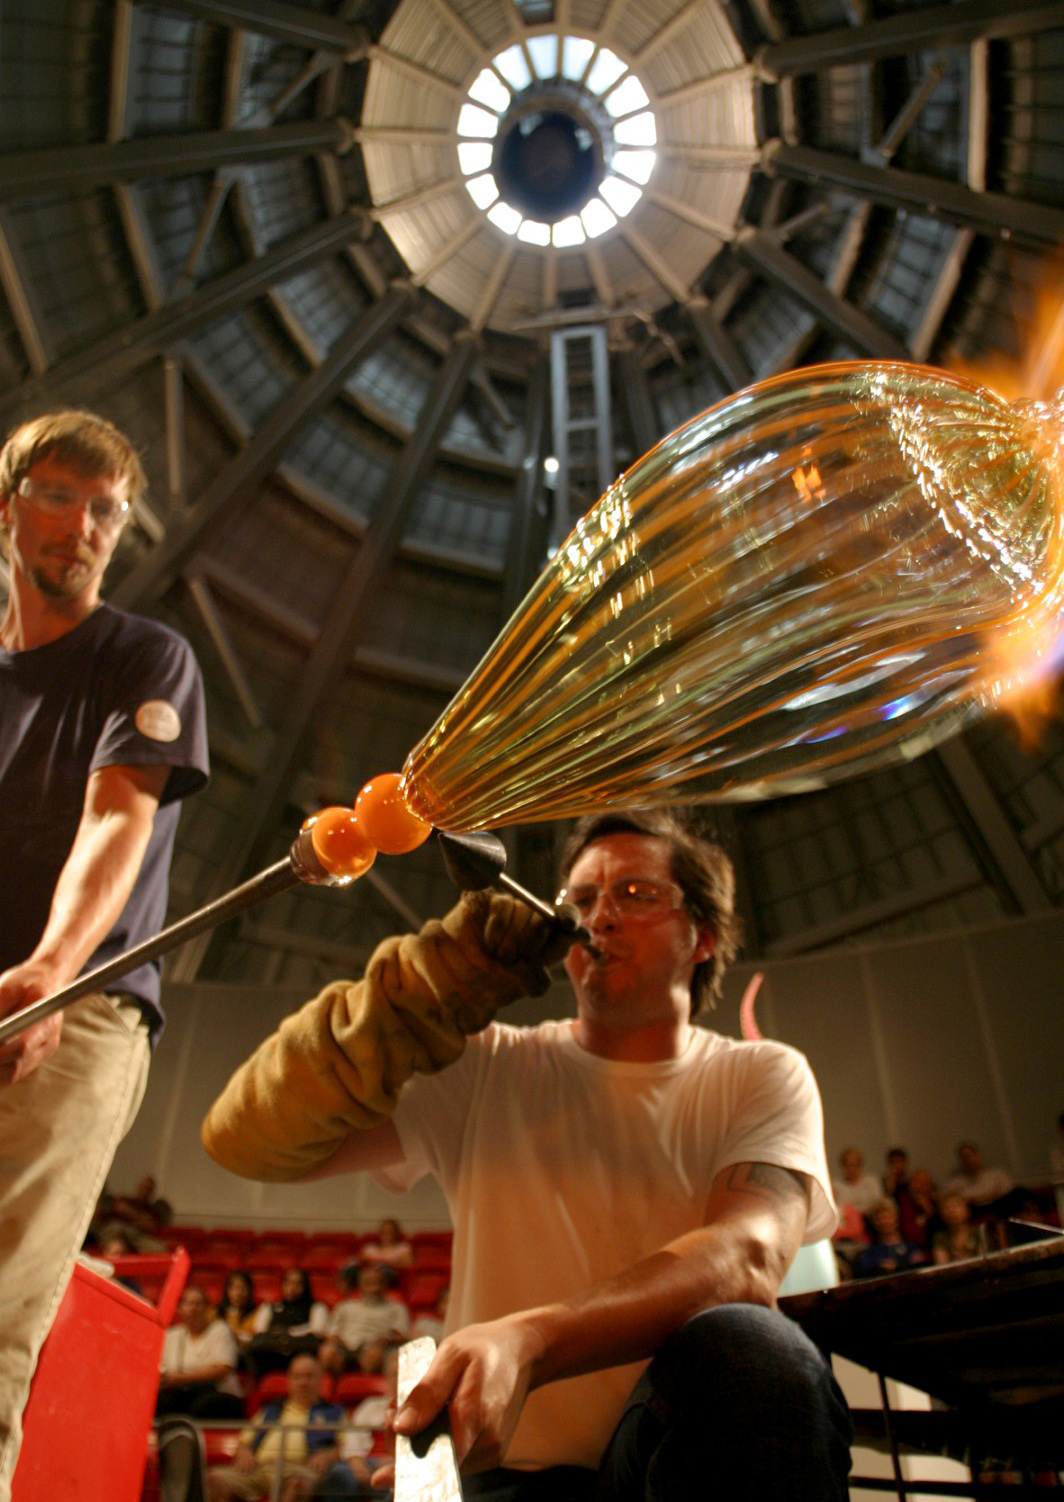 Feel the heat as you watch a team of artists create masterpieces from molten glass in the West Coast's largest Hot Shop—housed inside the iconic 90-foot stainless steel cone at the Museum of Glass. Photo by Mac Donnell.